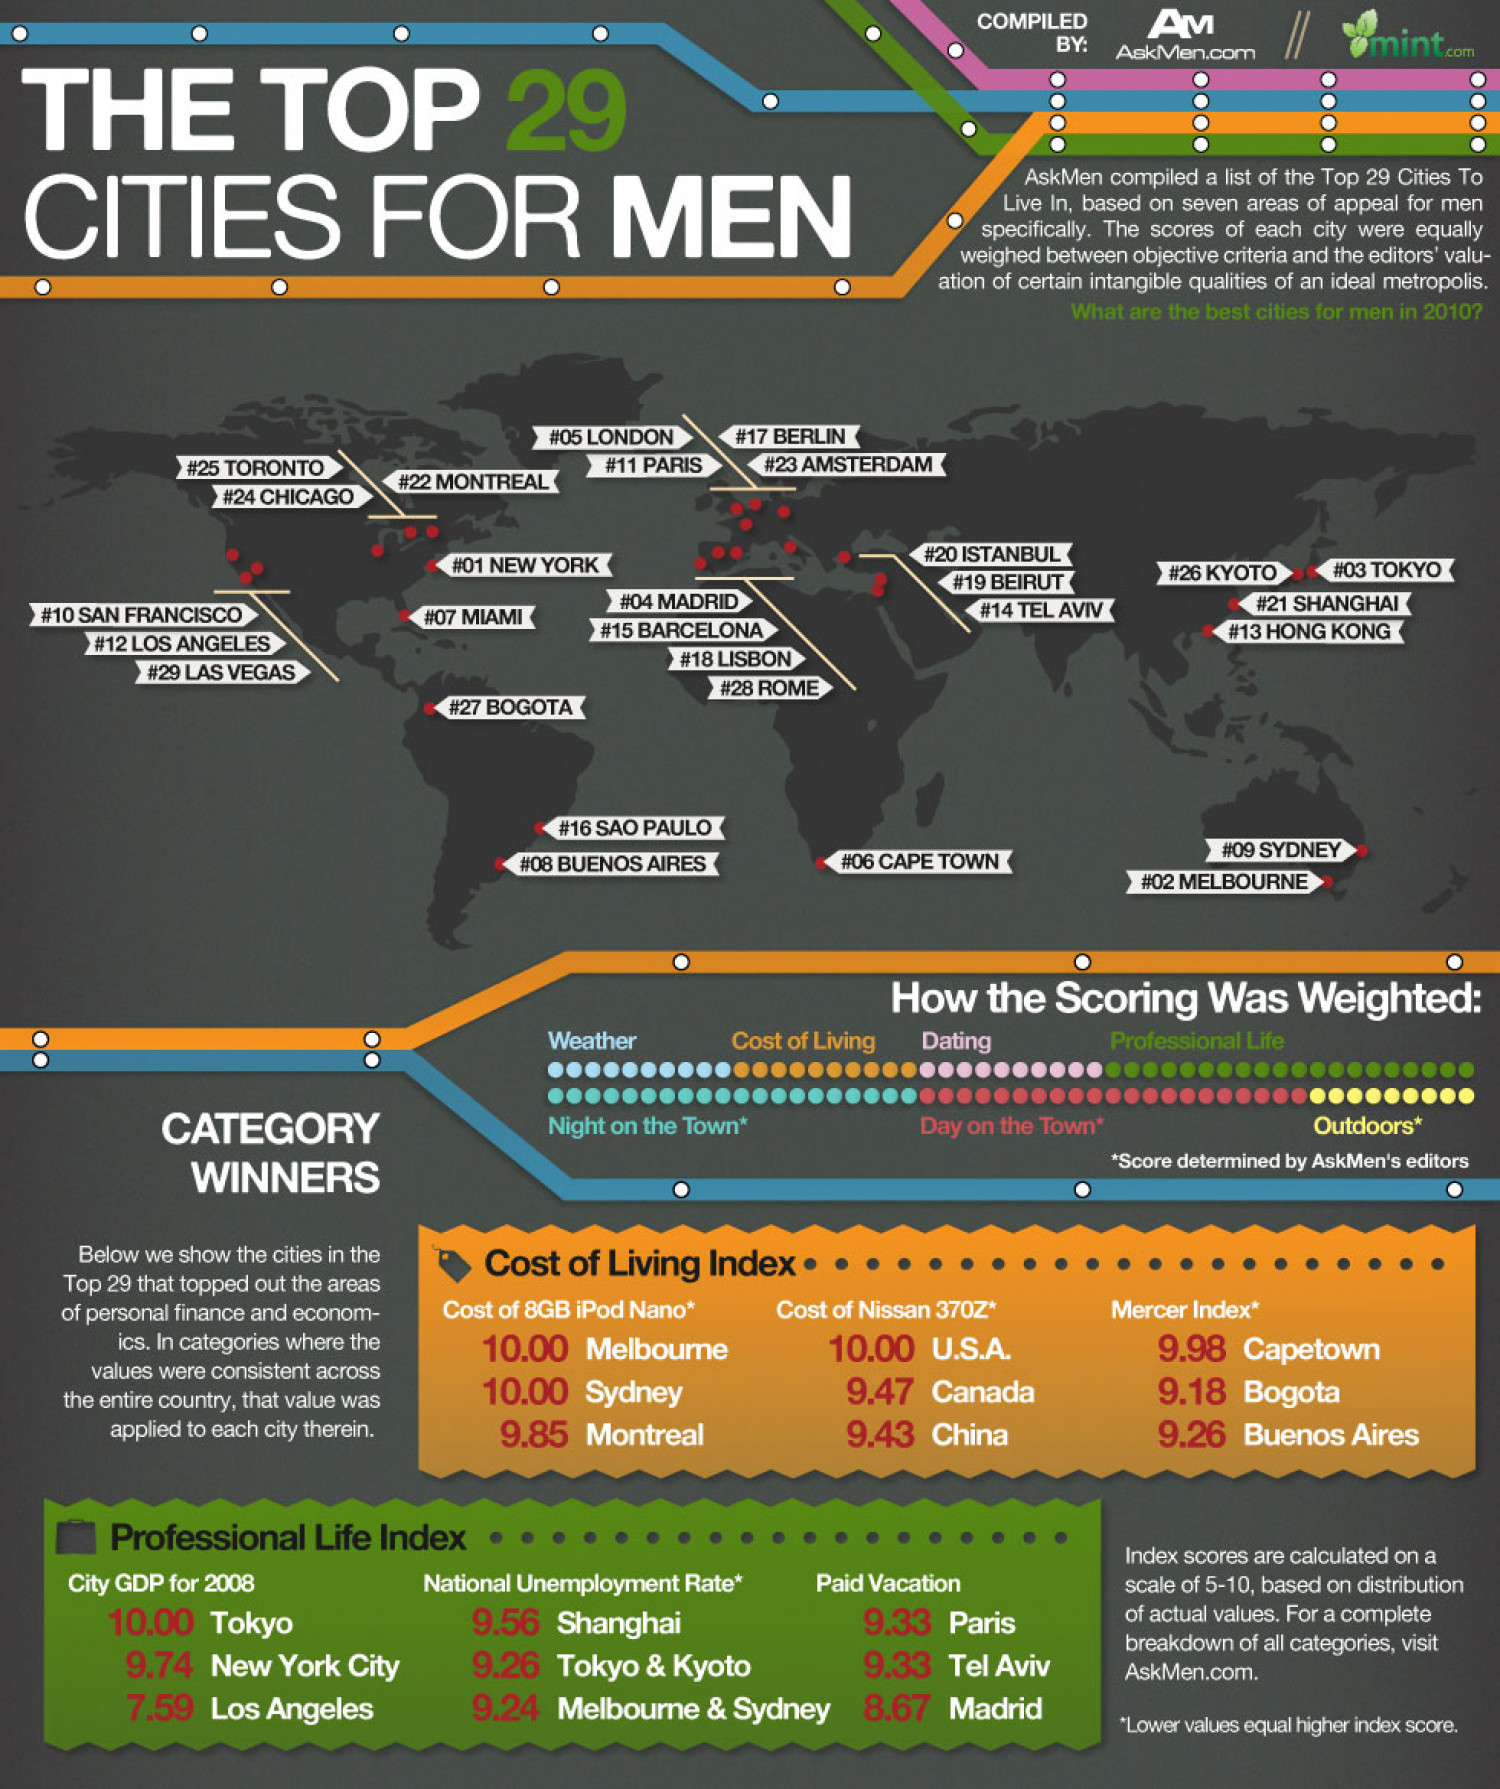 The Top 29 Cities for Men Infographic